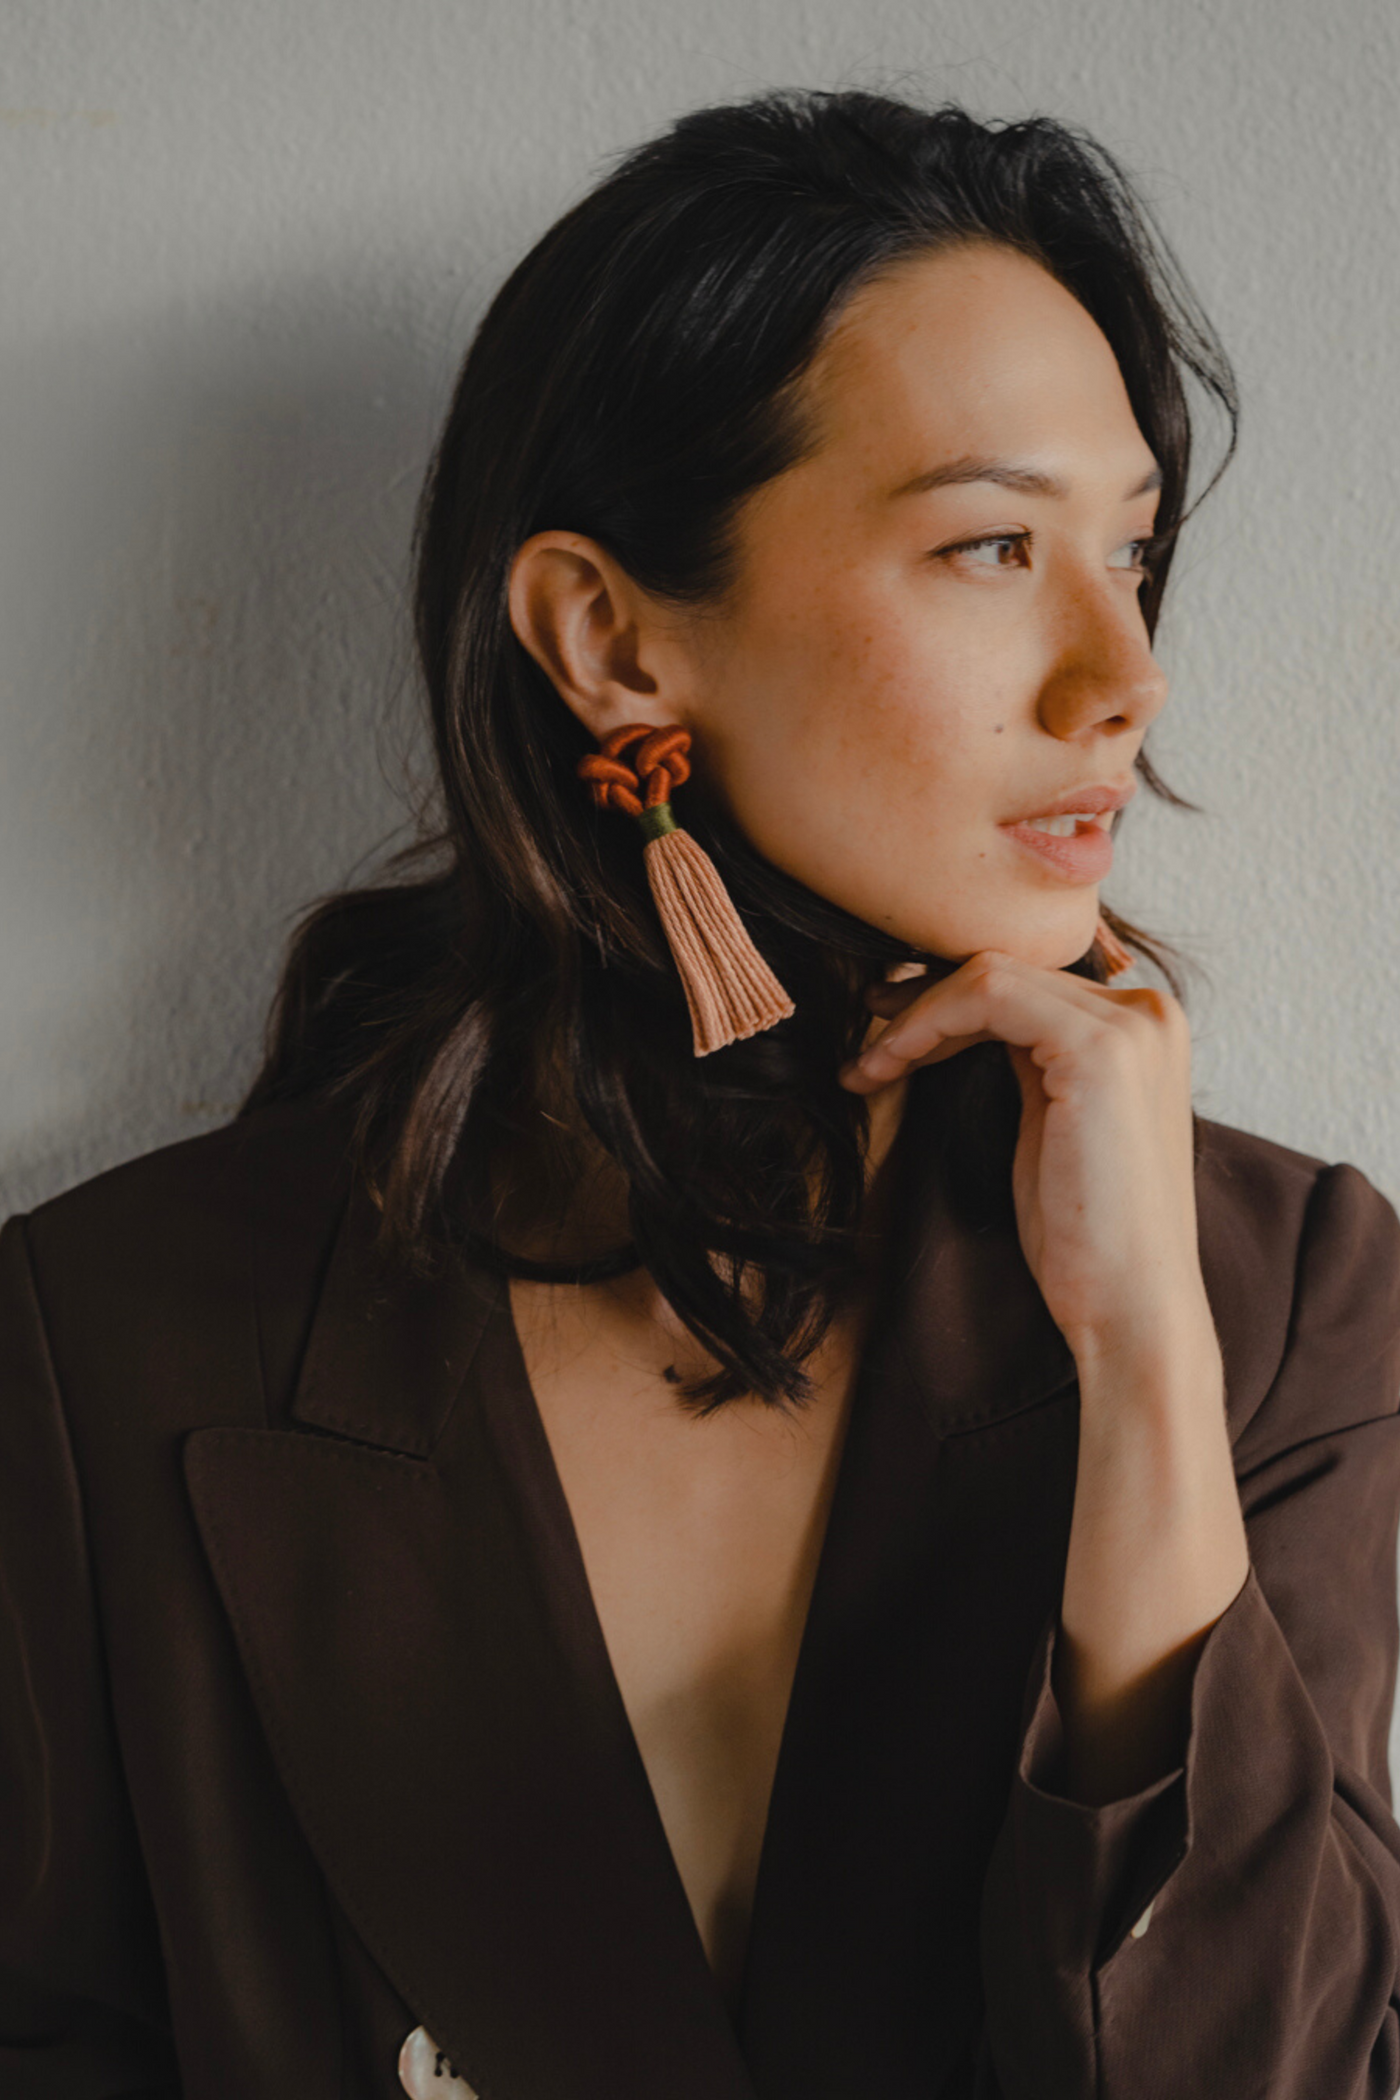 Talee Rama Knot Earrings in Sunset & Apricot, available on ZERRIN with free Singapore shipping